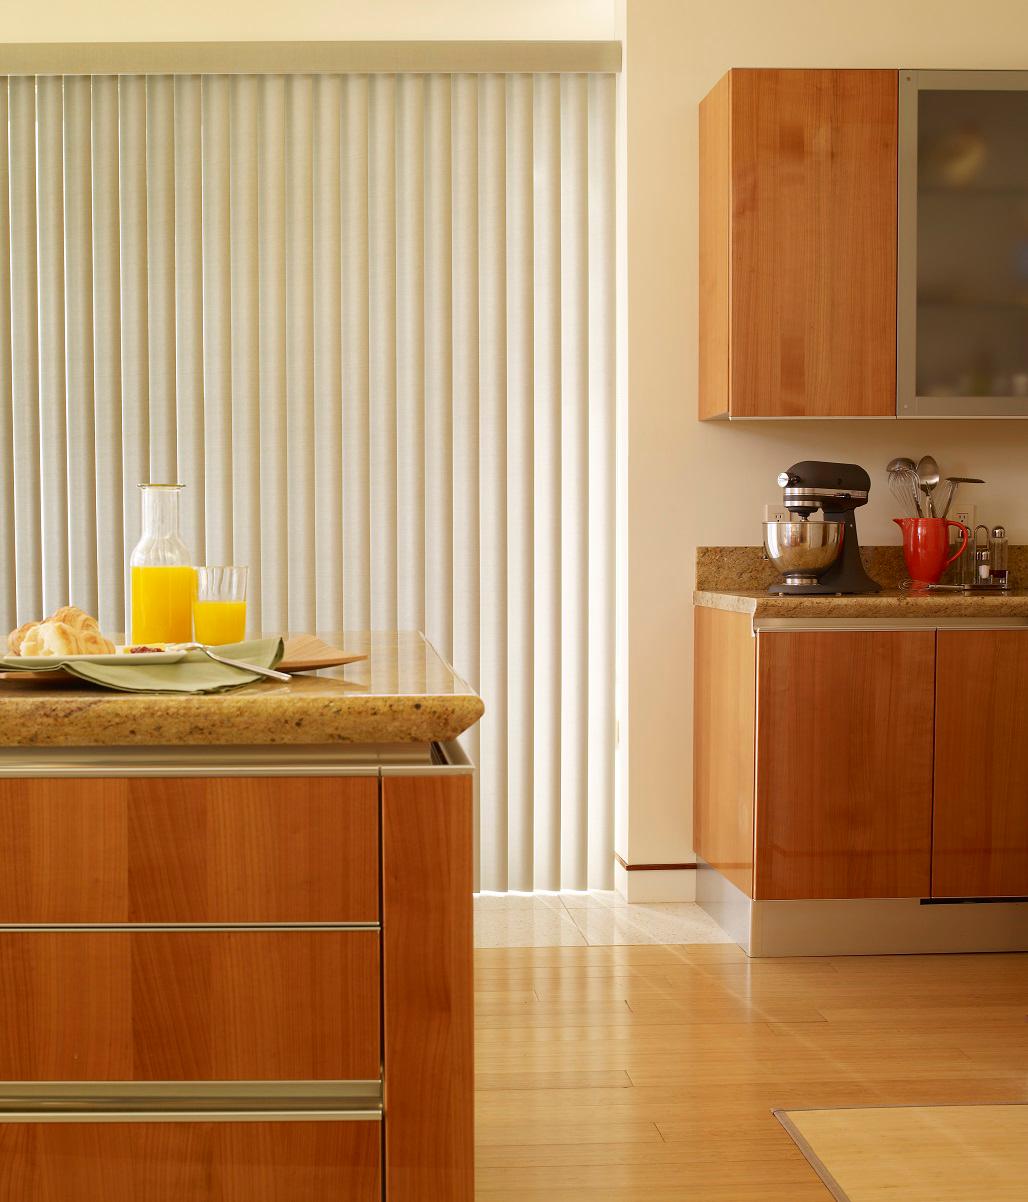 Ready to be enlightened? Then try our Enlightened Vertical Blinds! They're sleek,  easy to use, perfect for both windows and sliding doors-and they look amazing in this kitchen.  BudgetBlindsEnfield   VerticalBlinds  FreeConsultation  WindowWednesday